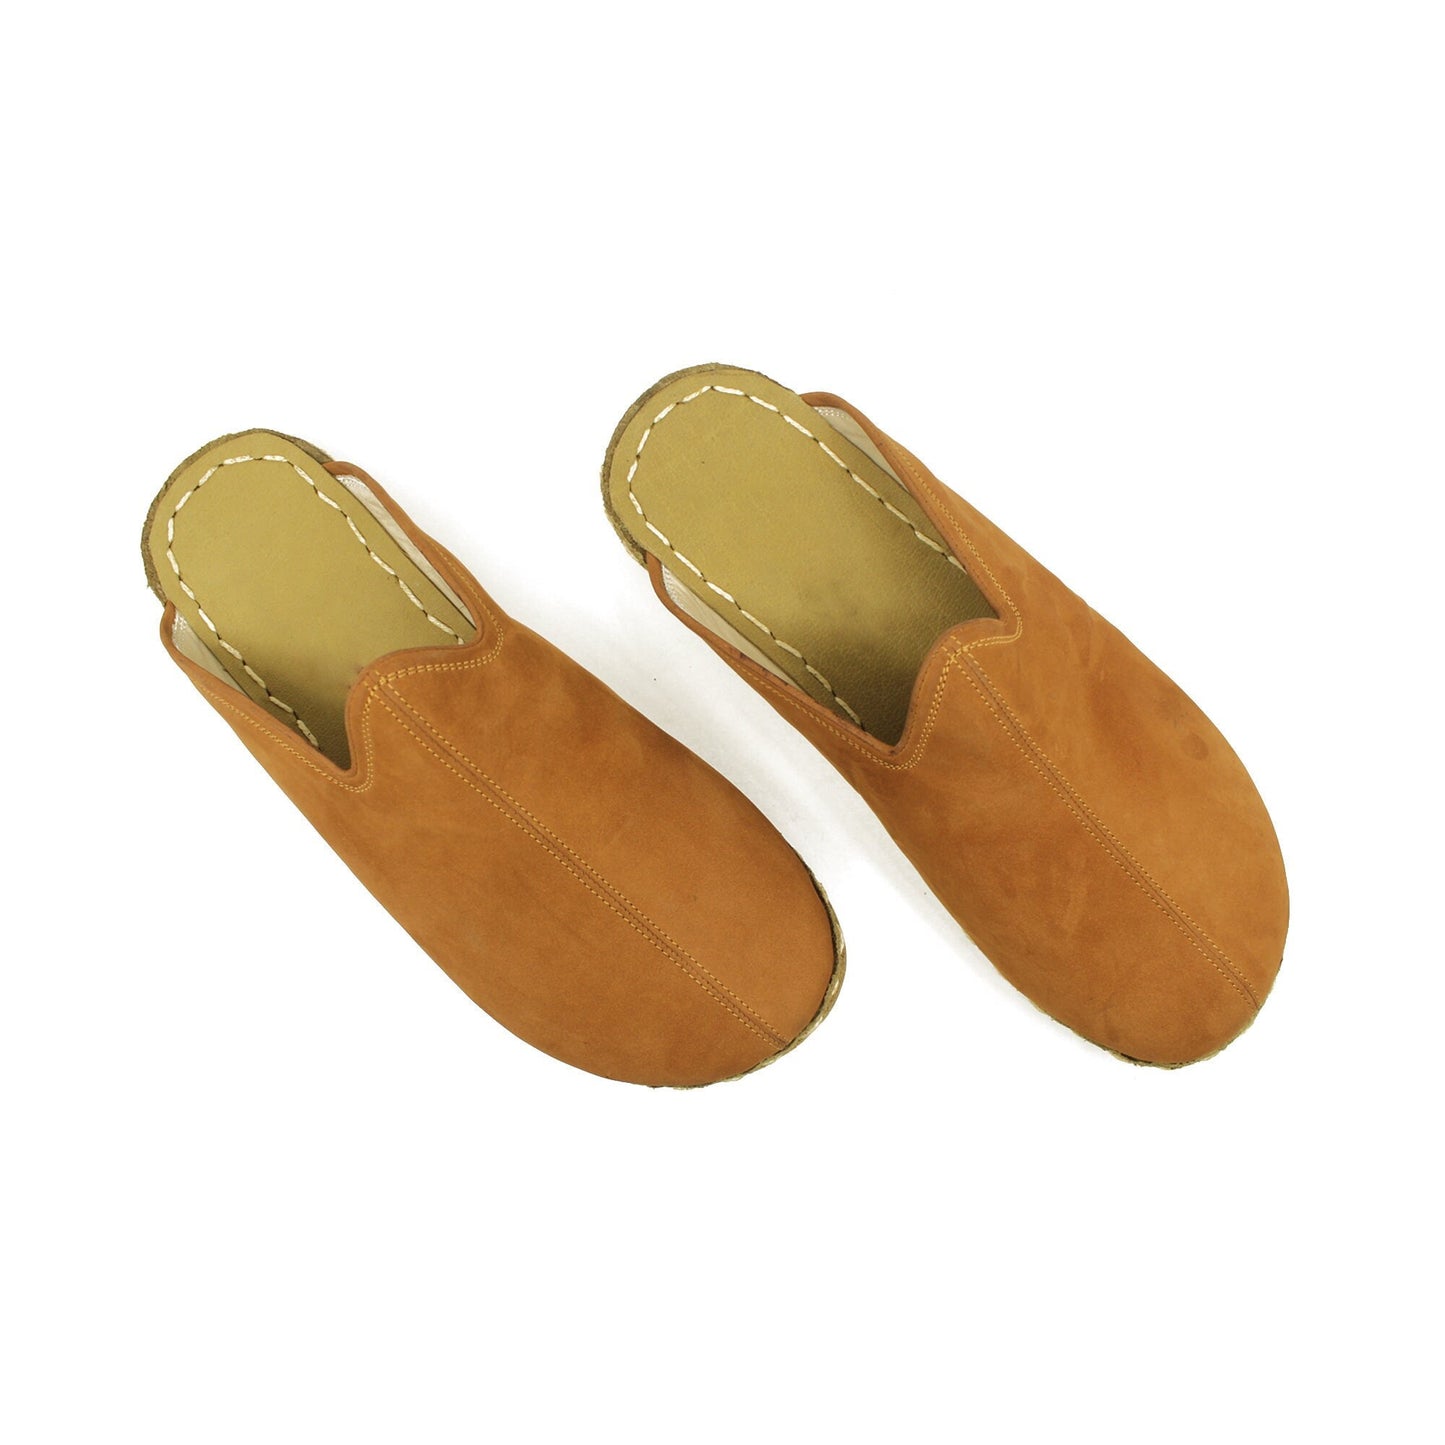 Barefoot - close toed slippers - Brown Nubuck Leather - Winter Slippers - For Women